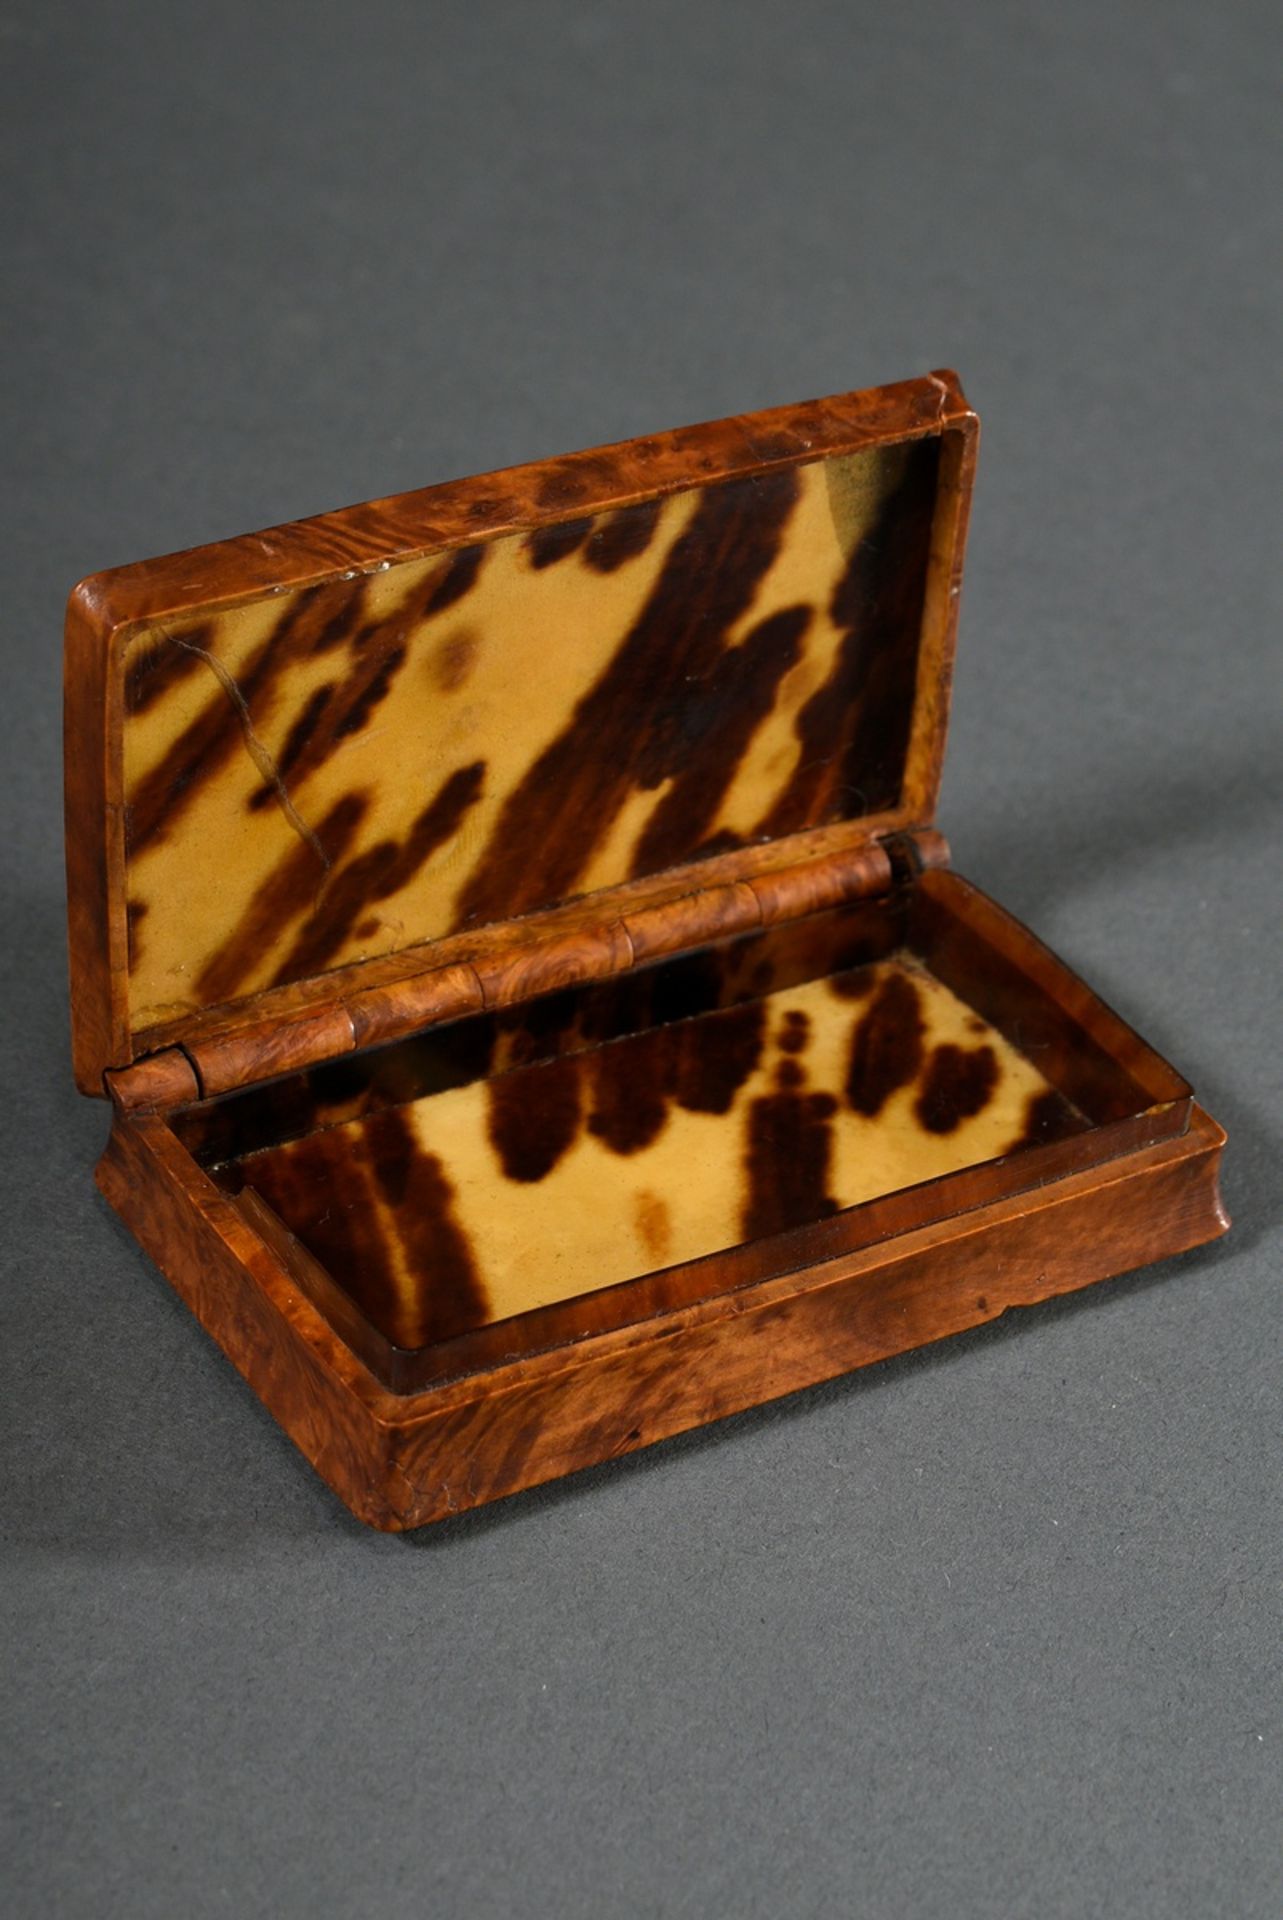 Boxwood box with finely painted miniature "Landscape with waterfall and staffage" in the lid and to - Image 3 of 3